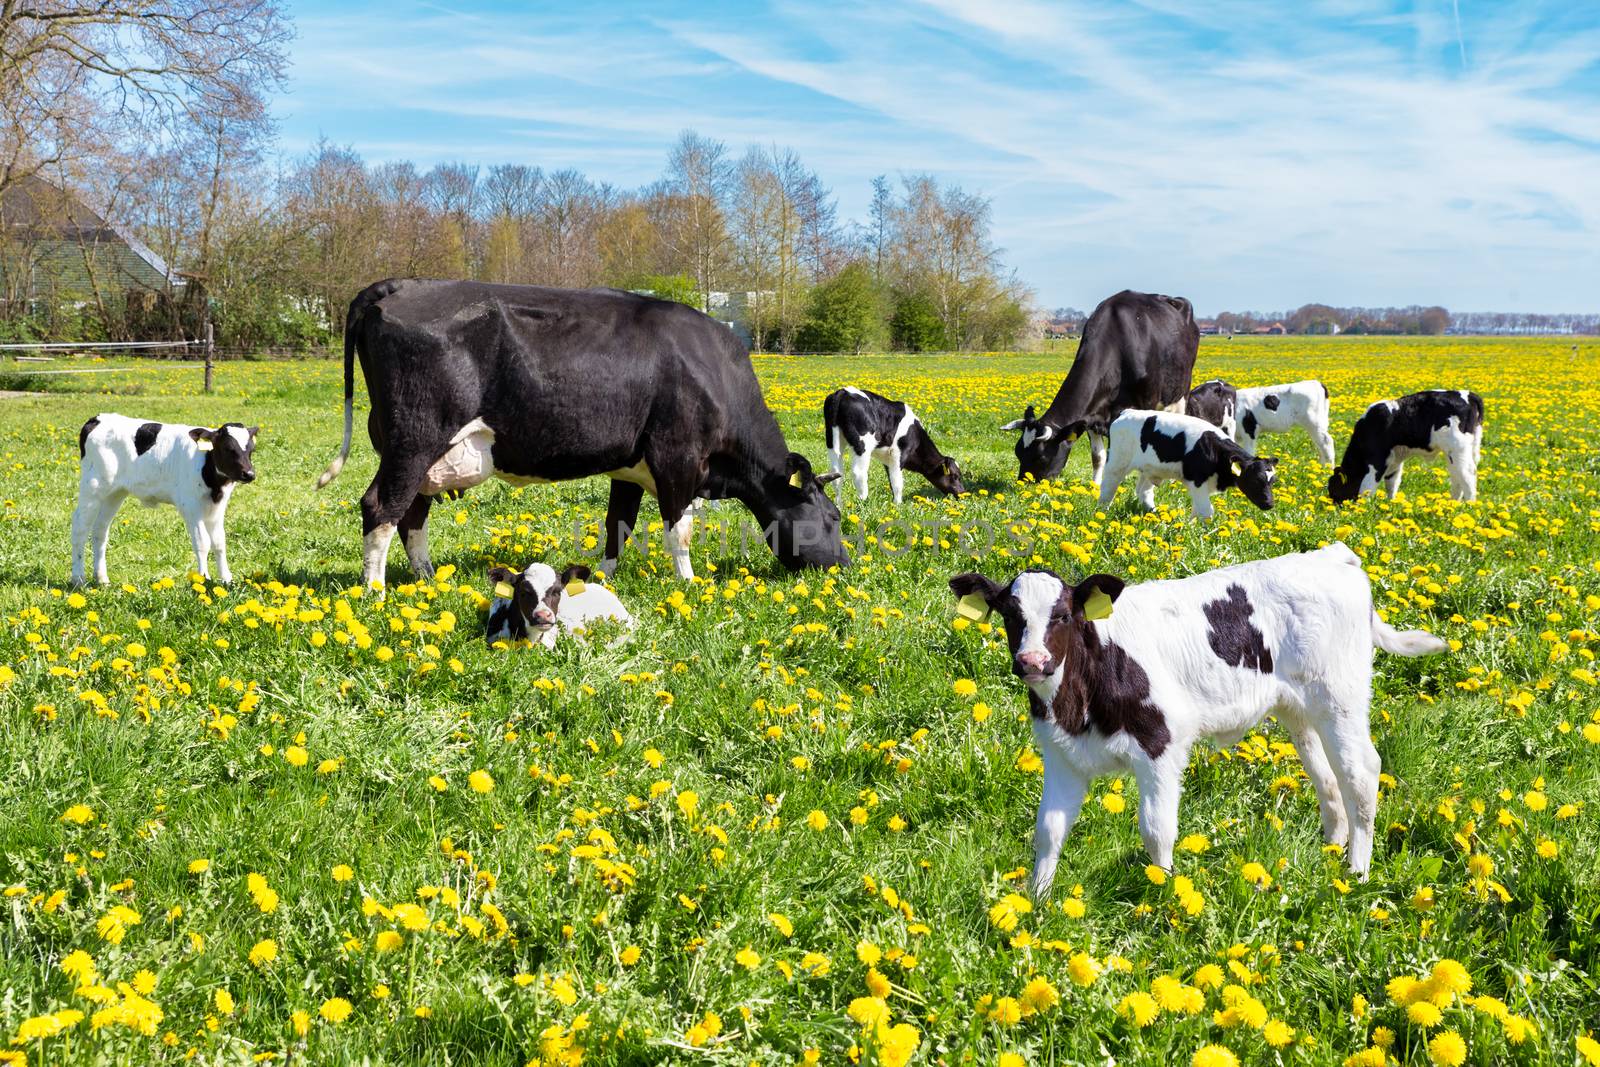 Meadow full of dandelions with grazing cows and calves by BenSchonewille